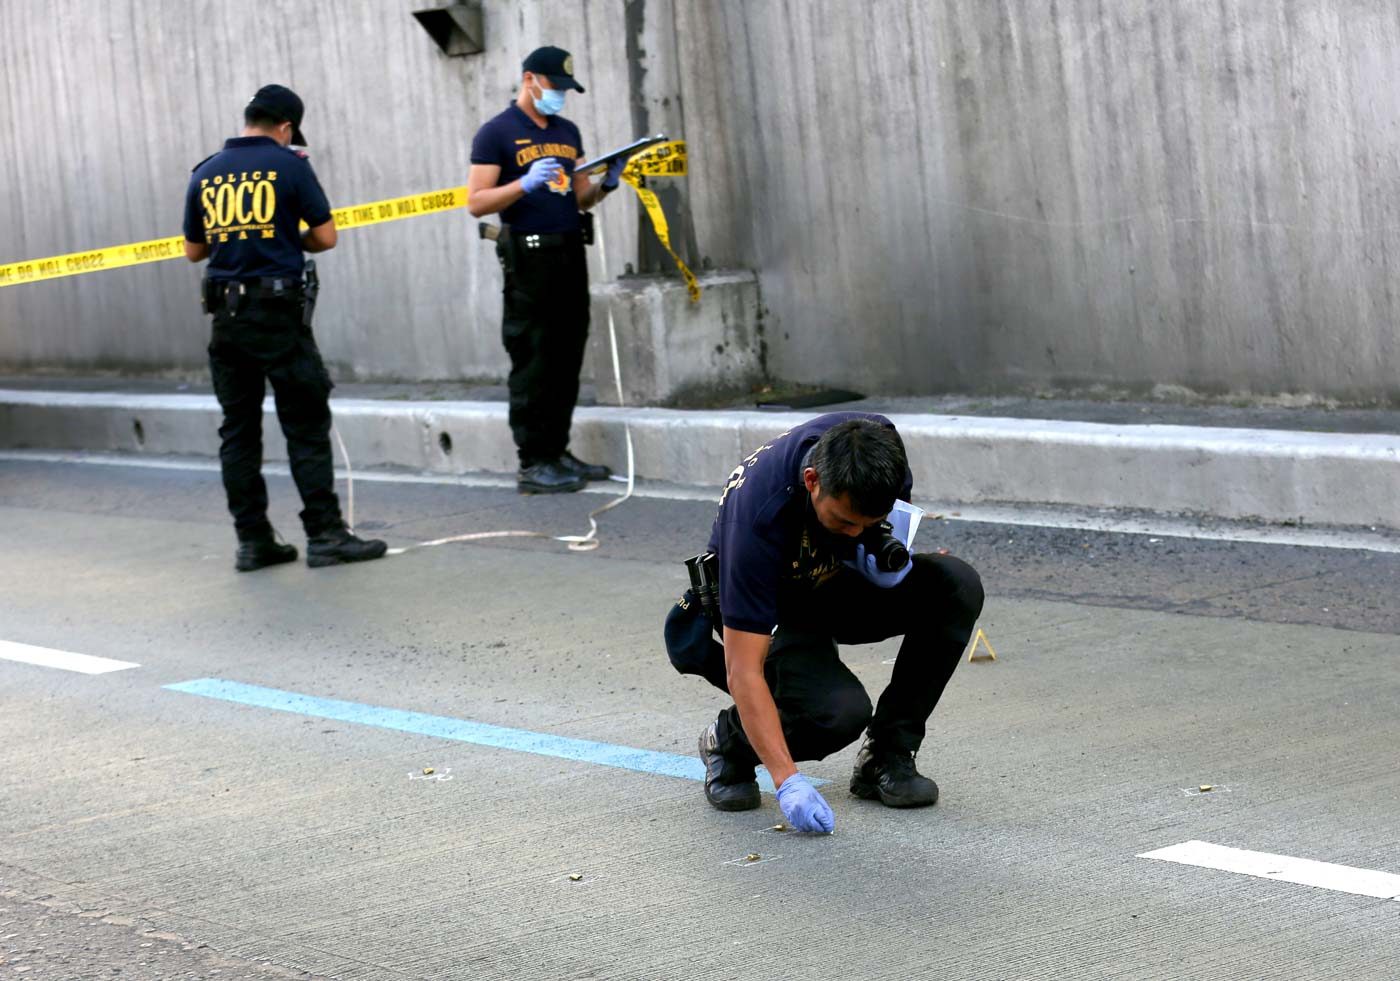 CRIME SCENE. The shooting incident along EDSA Boni Avenue in Mandaluyong City were two among the three victims were by unidentified gunmen on February 17, 2019. Photos by Inoue Jaena/Rappler   